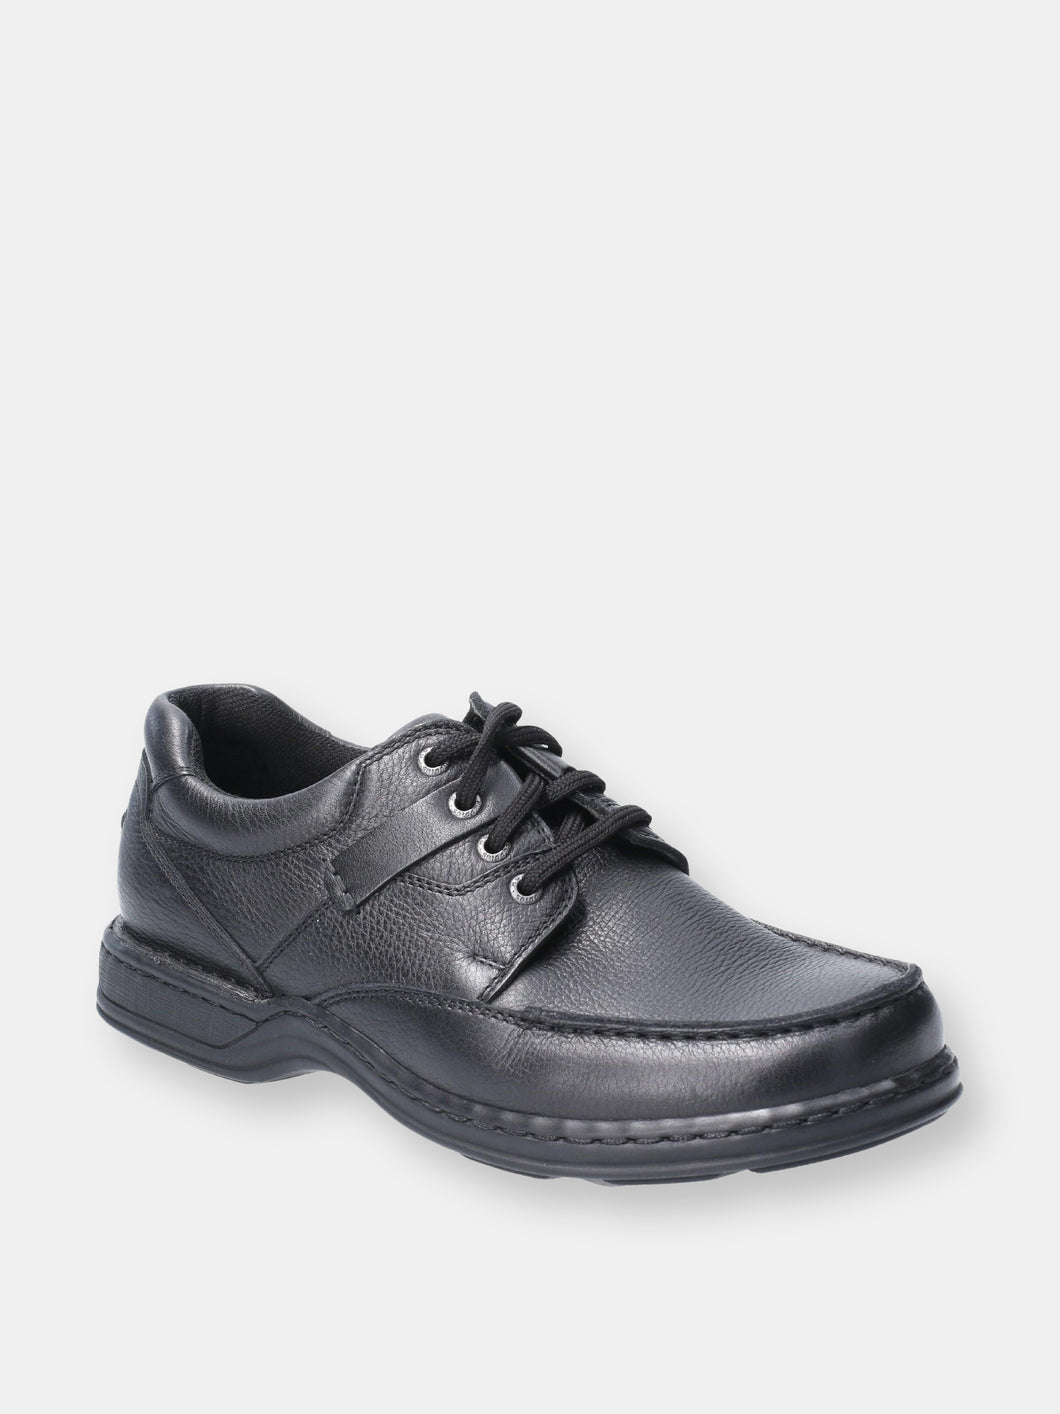 Randall II Mens Leather Lace Up Shoe - Black